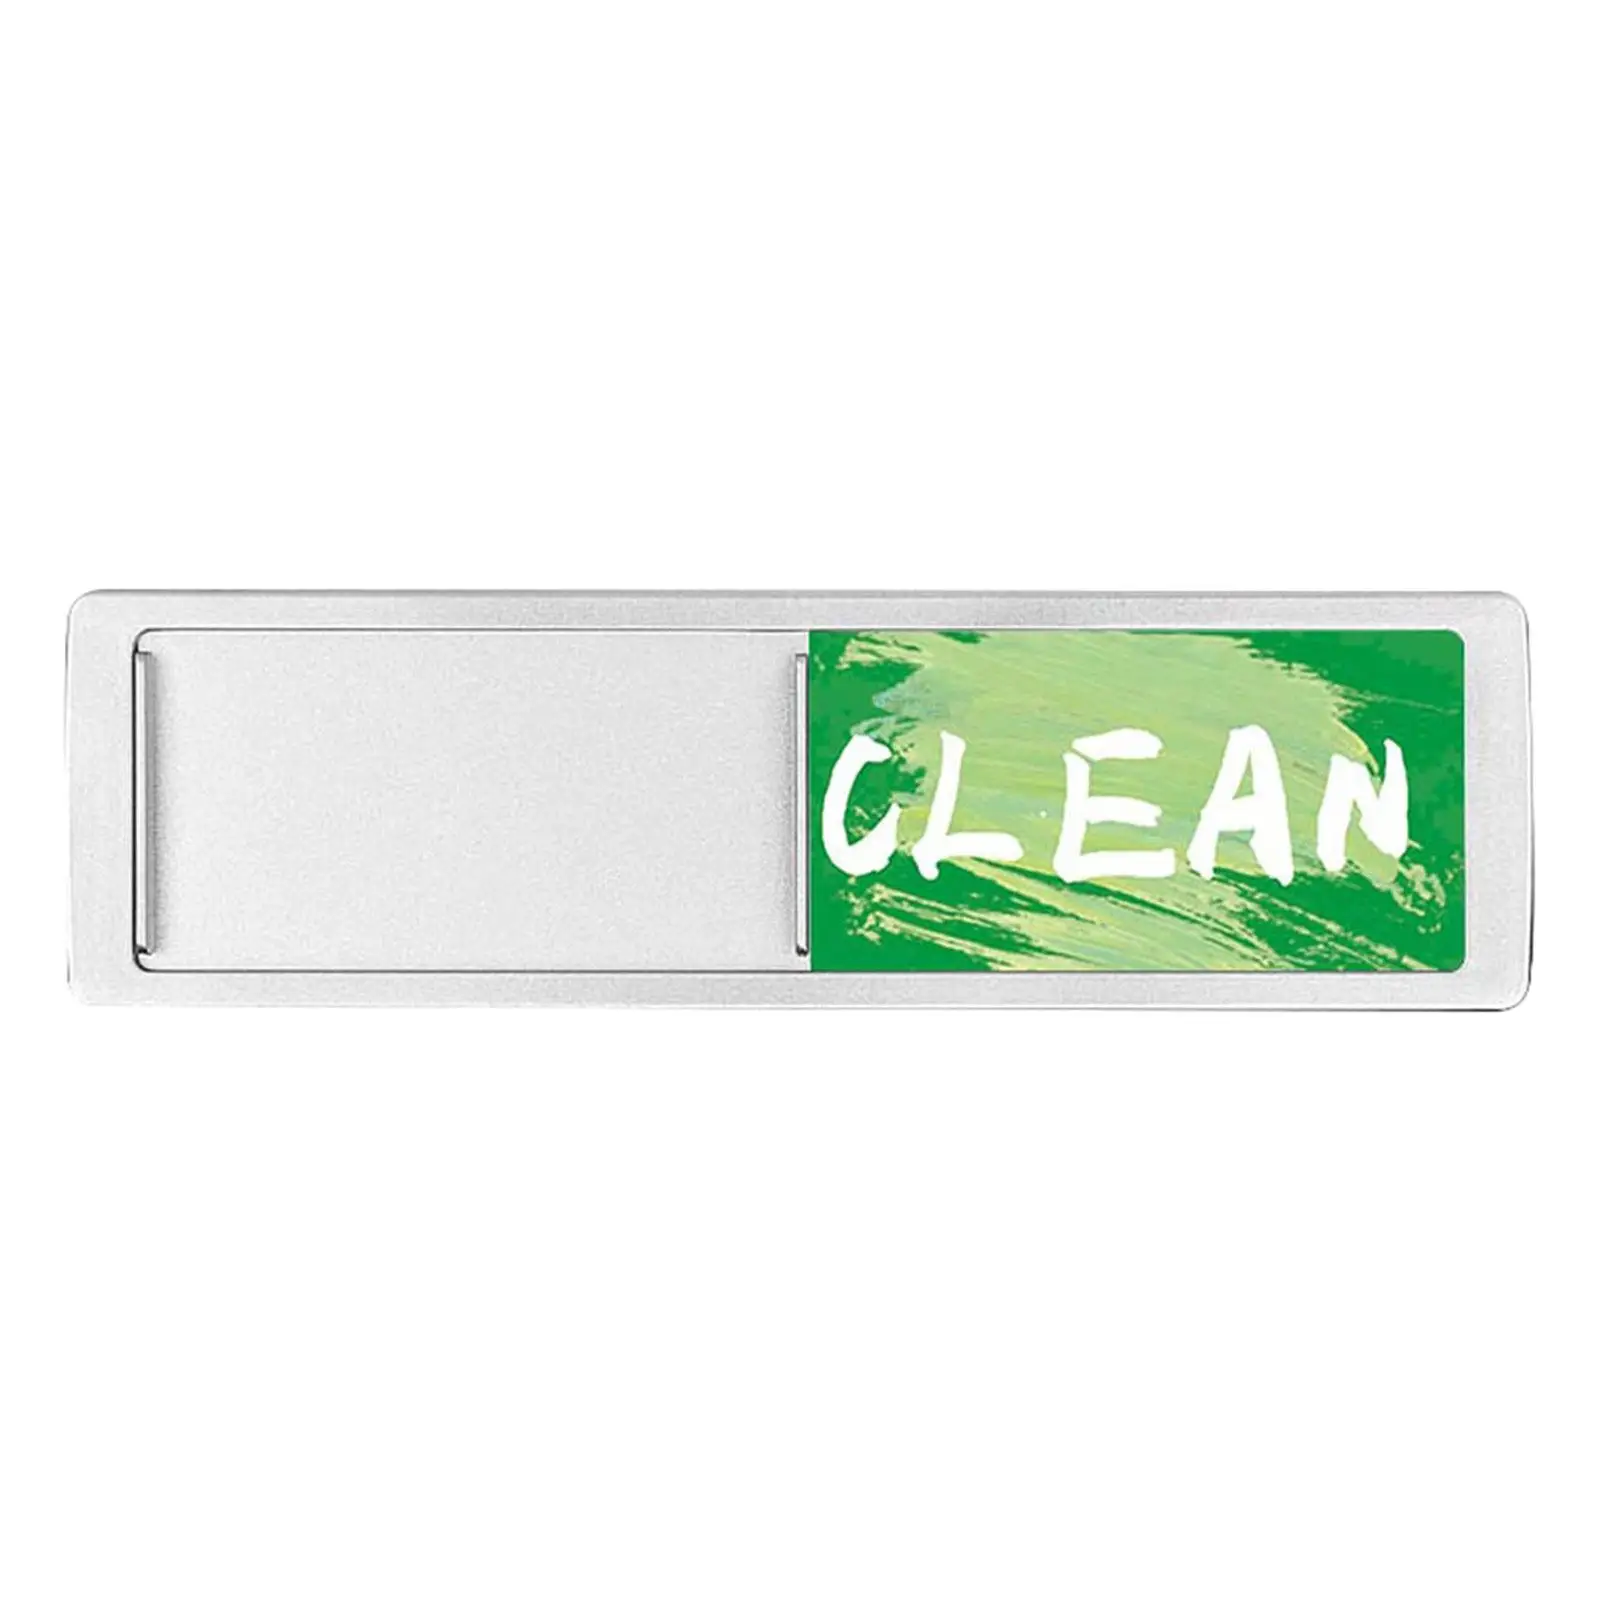 Double Sided Dishwasher Clean Dirty Sign Indicator Non Scratching Home Decor Kitchen Decor Cute for Kitchen Laundry Dishwasher